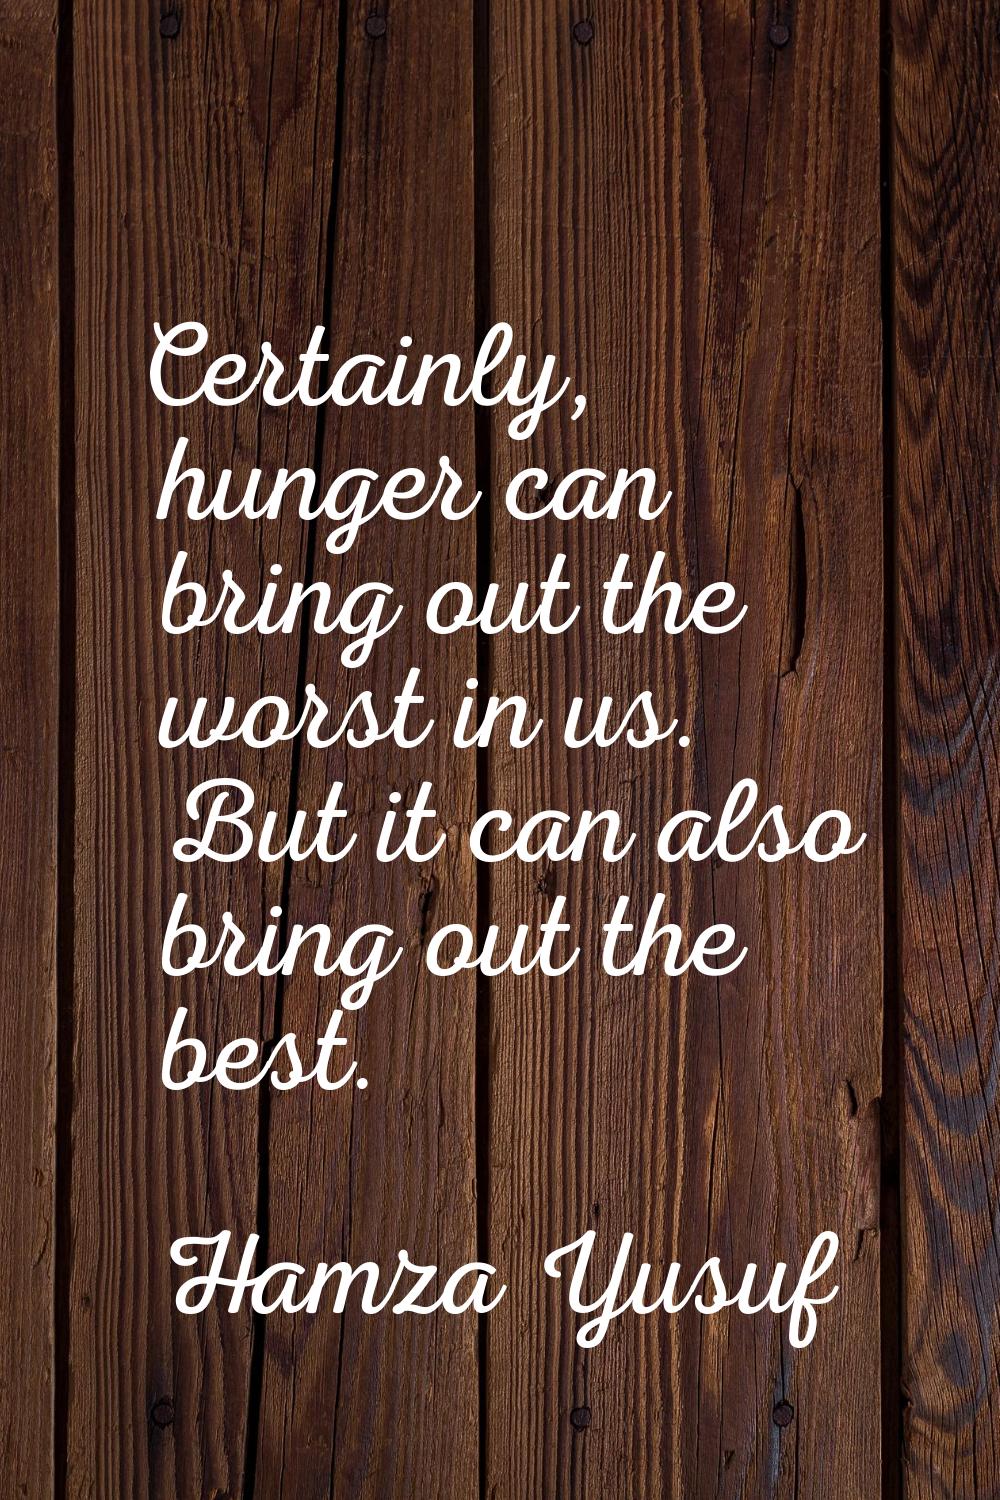 Certainly, hunger can bring out the worst in us. But it can also bring out the best.